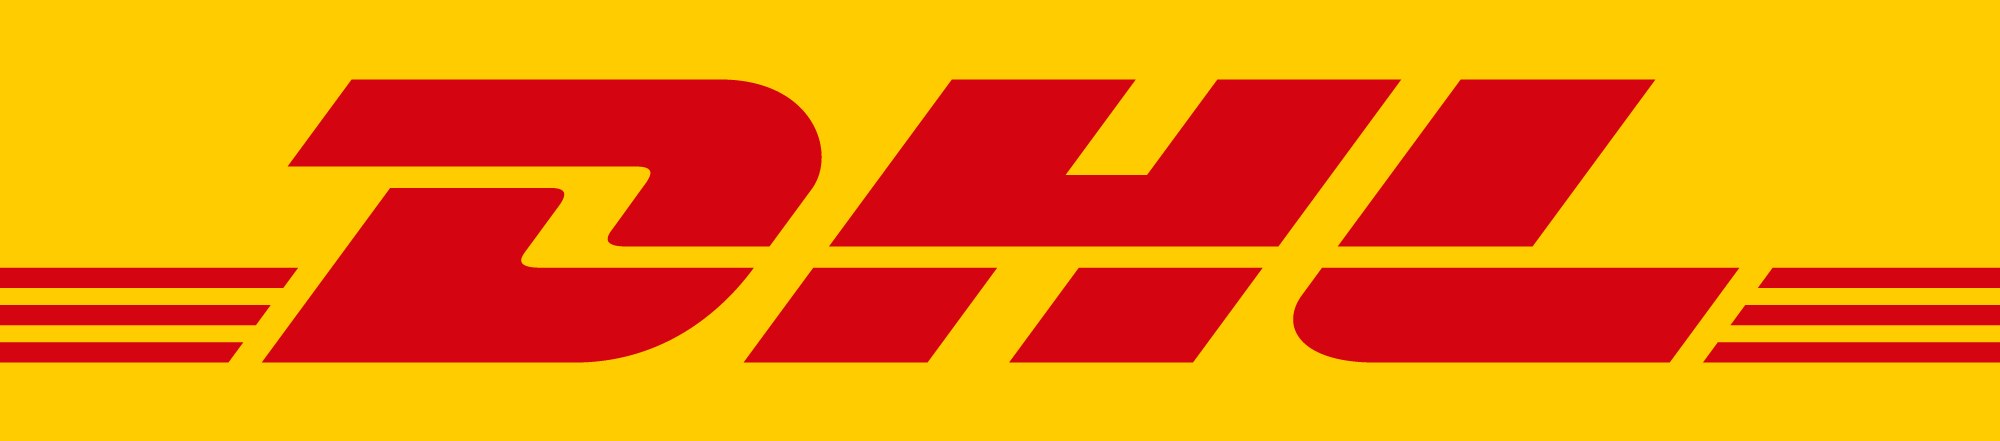 DHL Track&Trace